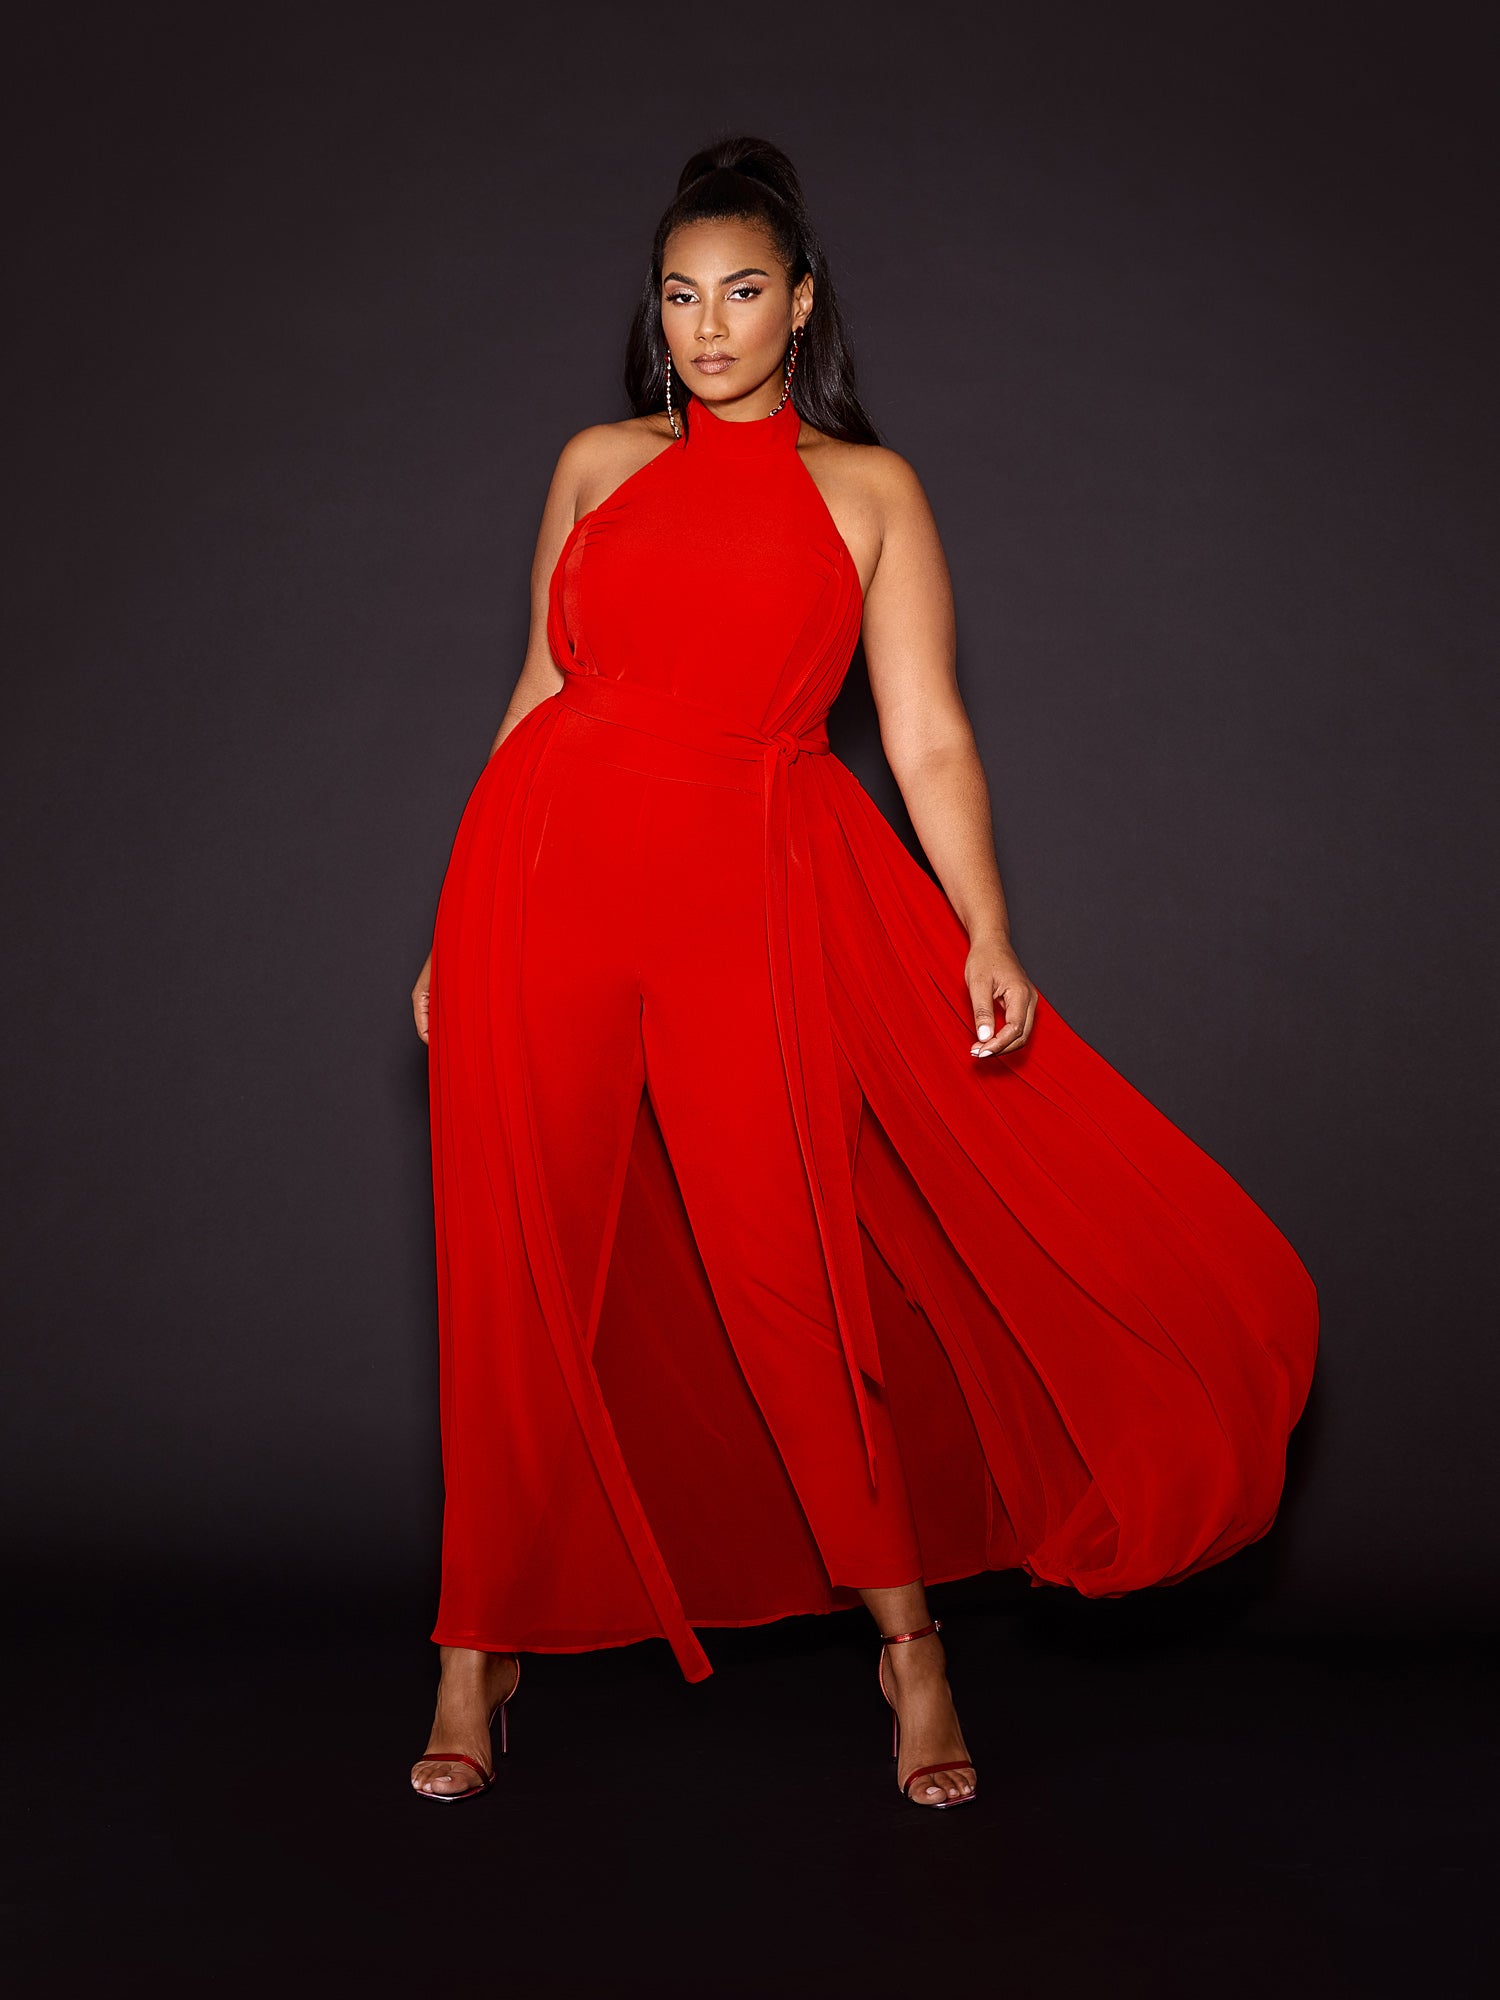 Gabrielle Union Launches A Curvy Collection With Fashion To Figure